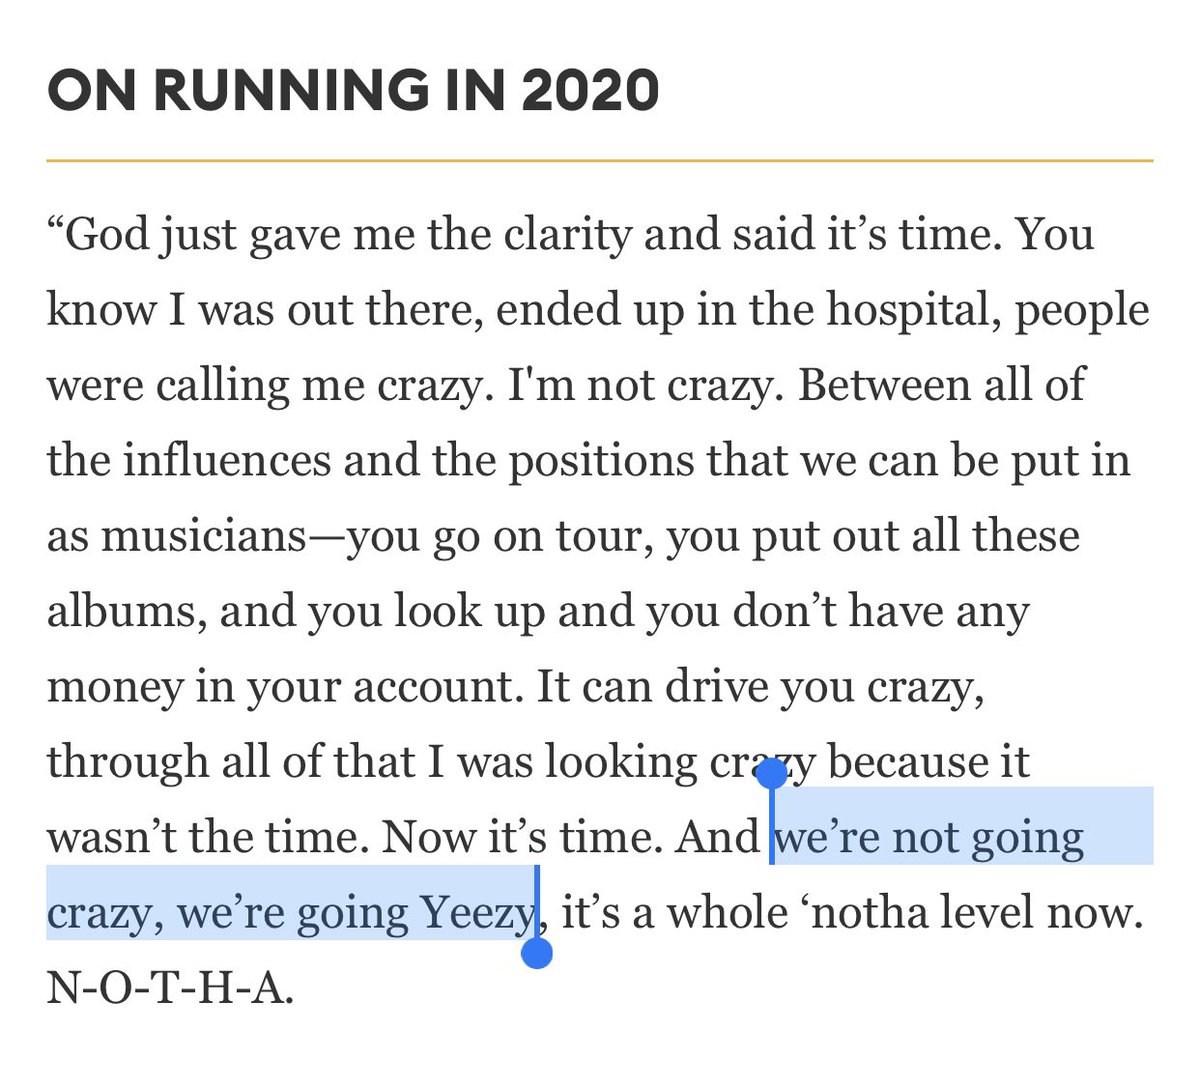 “And we’re not going crazy, we’re going Yeezy” is up there among the most Kanye phrases ever uttered